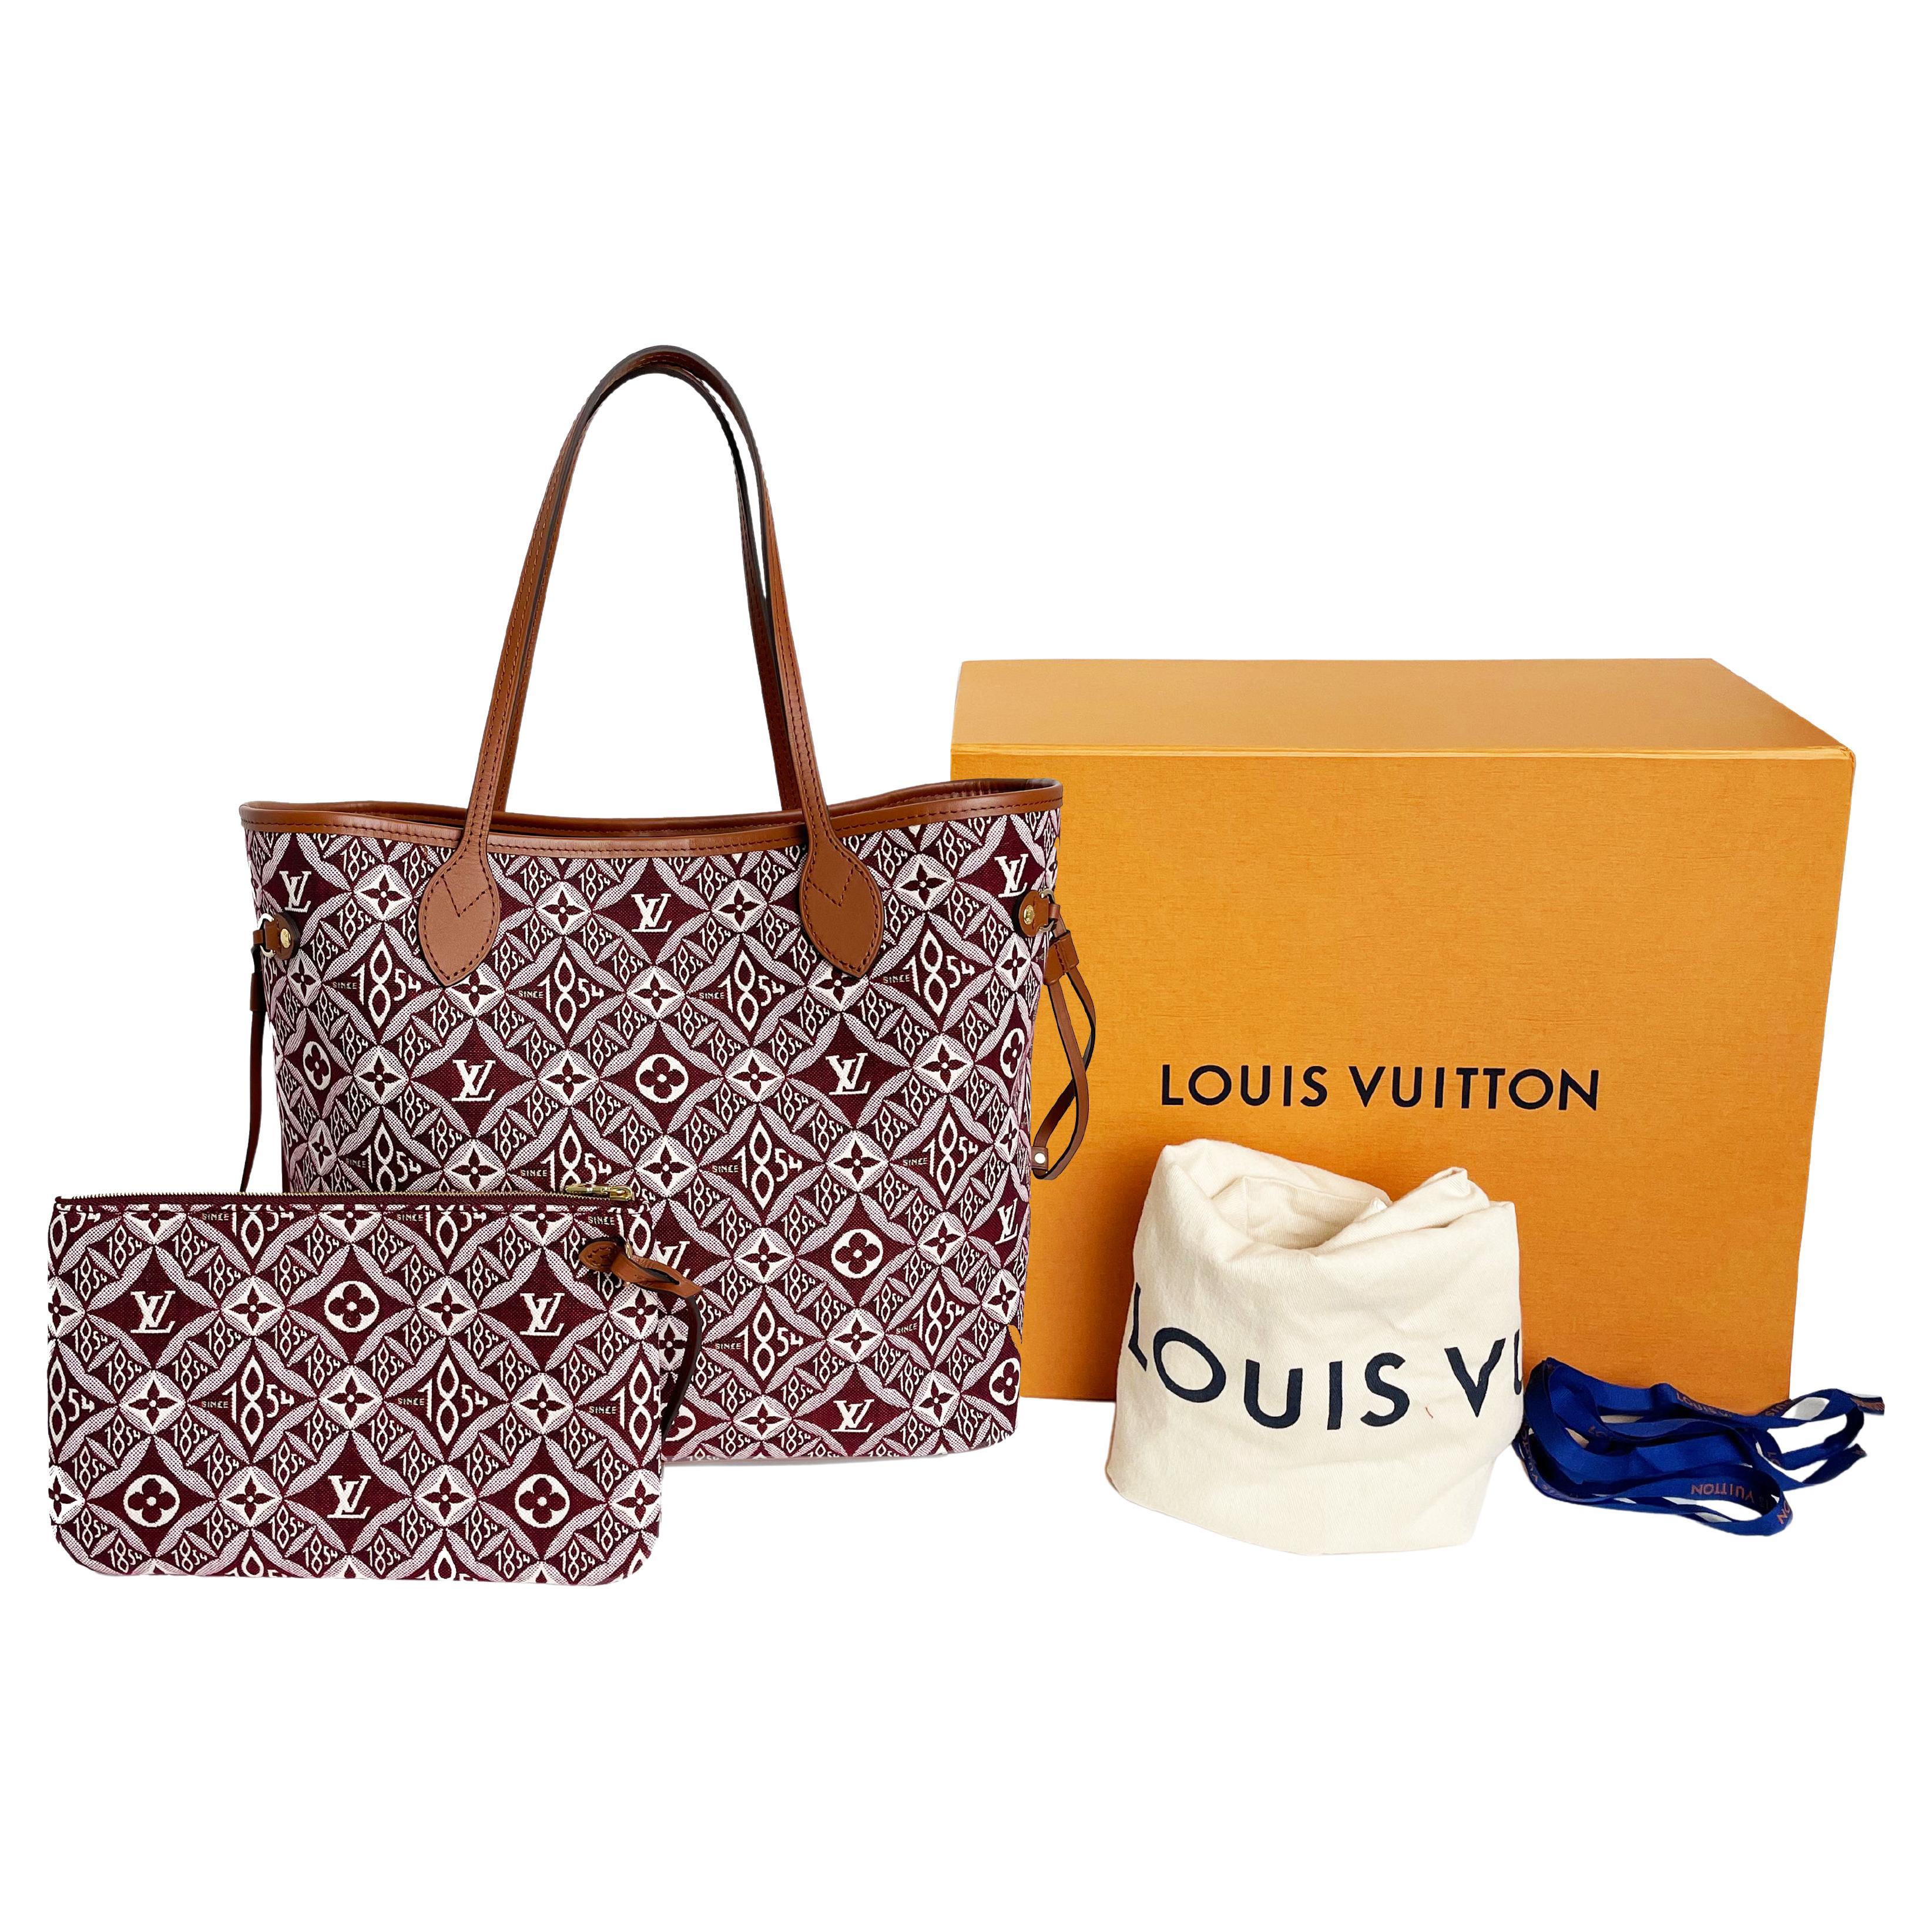 Louis Vuitton 1854 Collection - 3 For Sale on 1stDibs